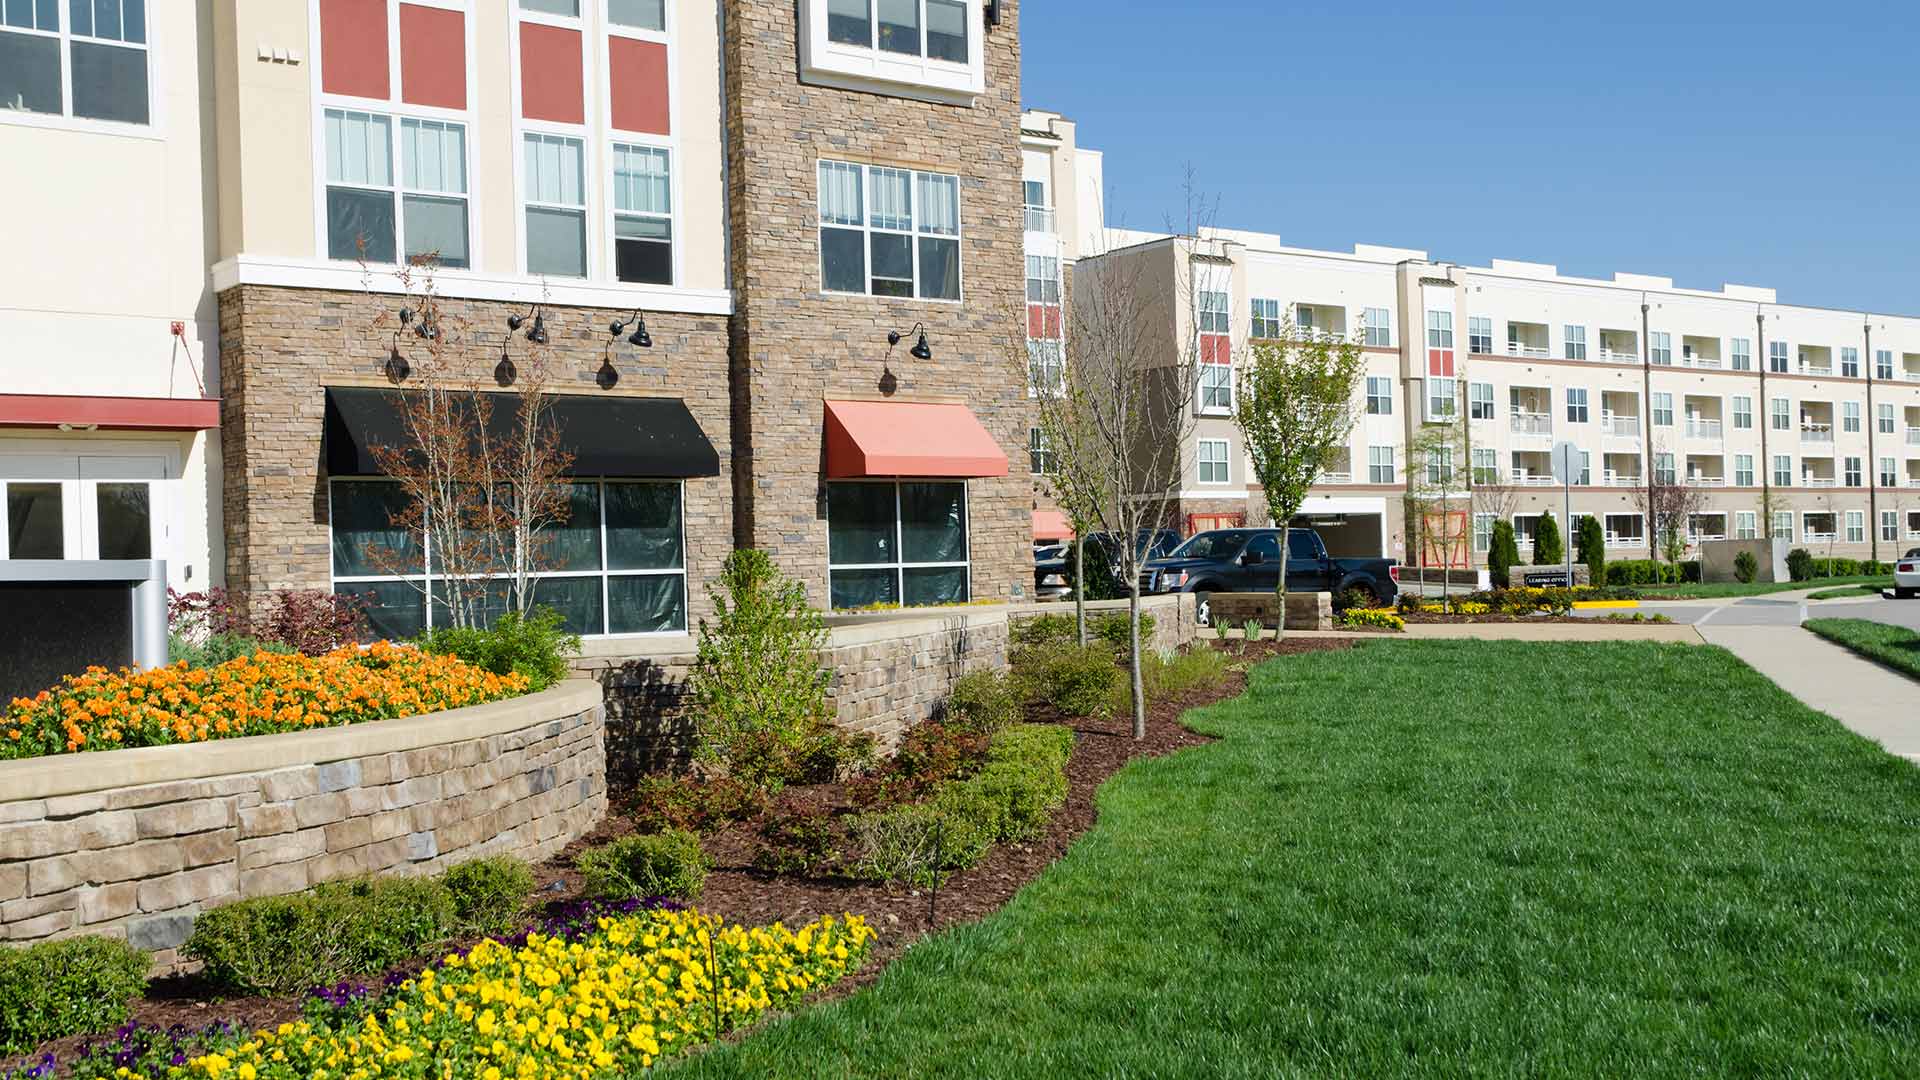 Commercial property in Ankeny, IA with regular lawn care and landscaping services.